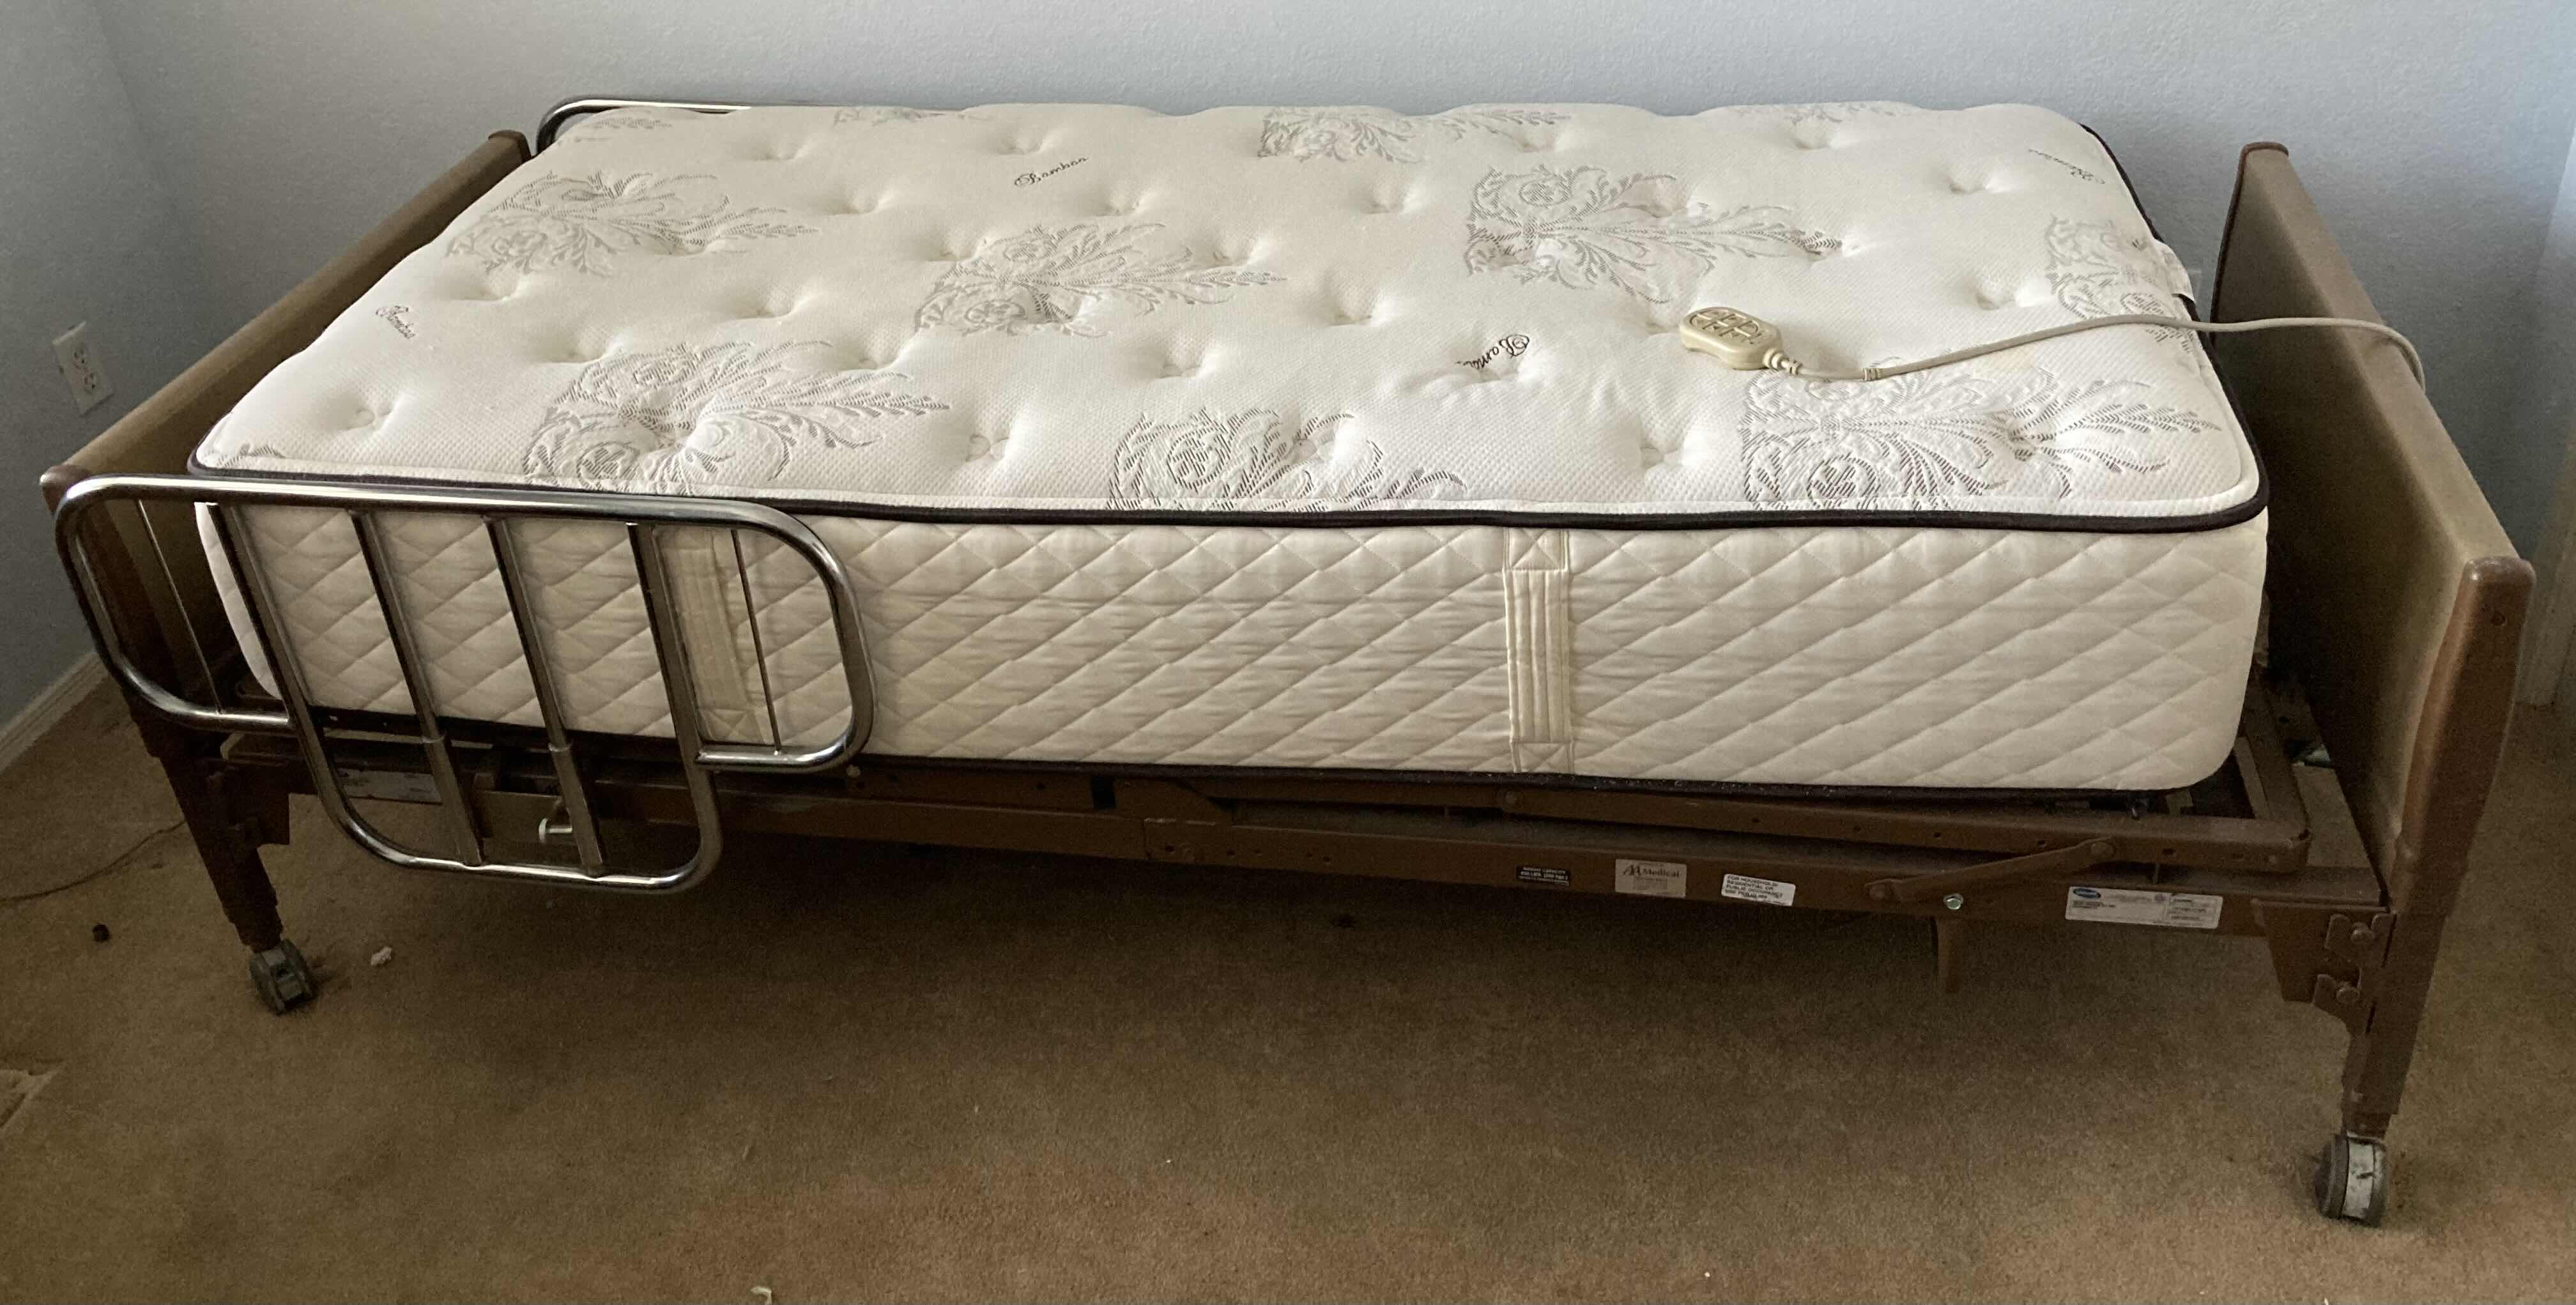 Photo 1 of INVACARE STEEL TWIN MEDICAL BED MODEL 5490IVC W HALSTEAD TWIN MATTRESS